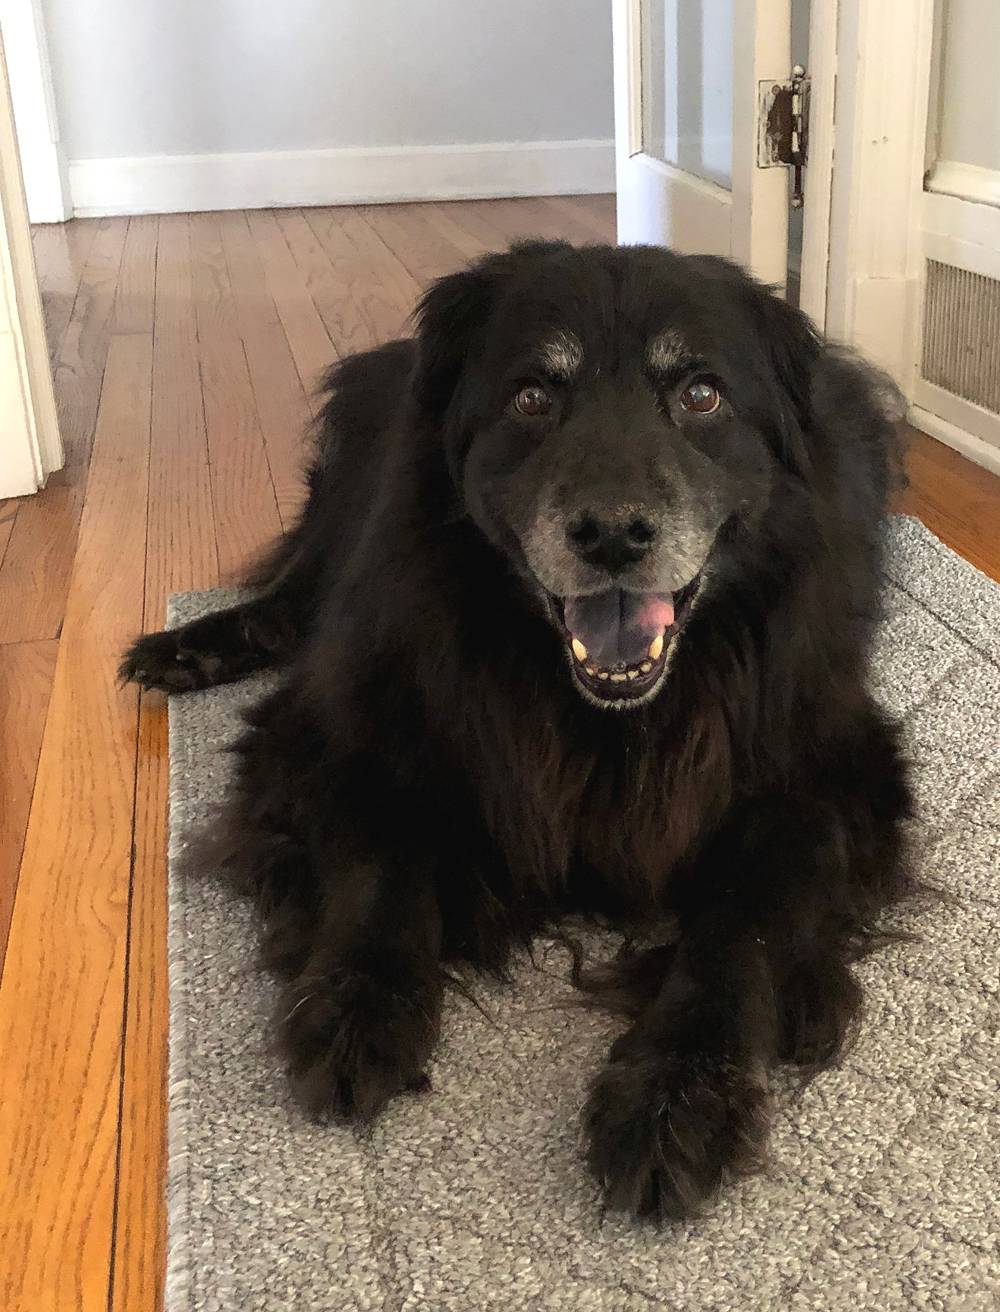 A fluffly black dog with a gray maw lays on a gray carpet runner on hardwood floors. It looks into the camera with its mouth open. It looks like it is smiling. It's head is up and facing forward; front paws are outstretched. Photo by Jessica Hammie.